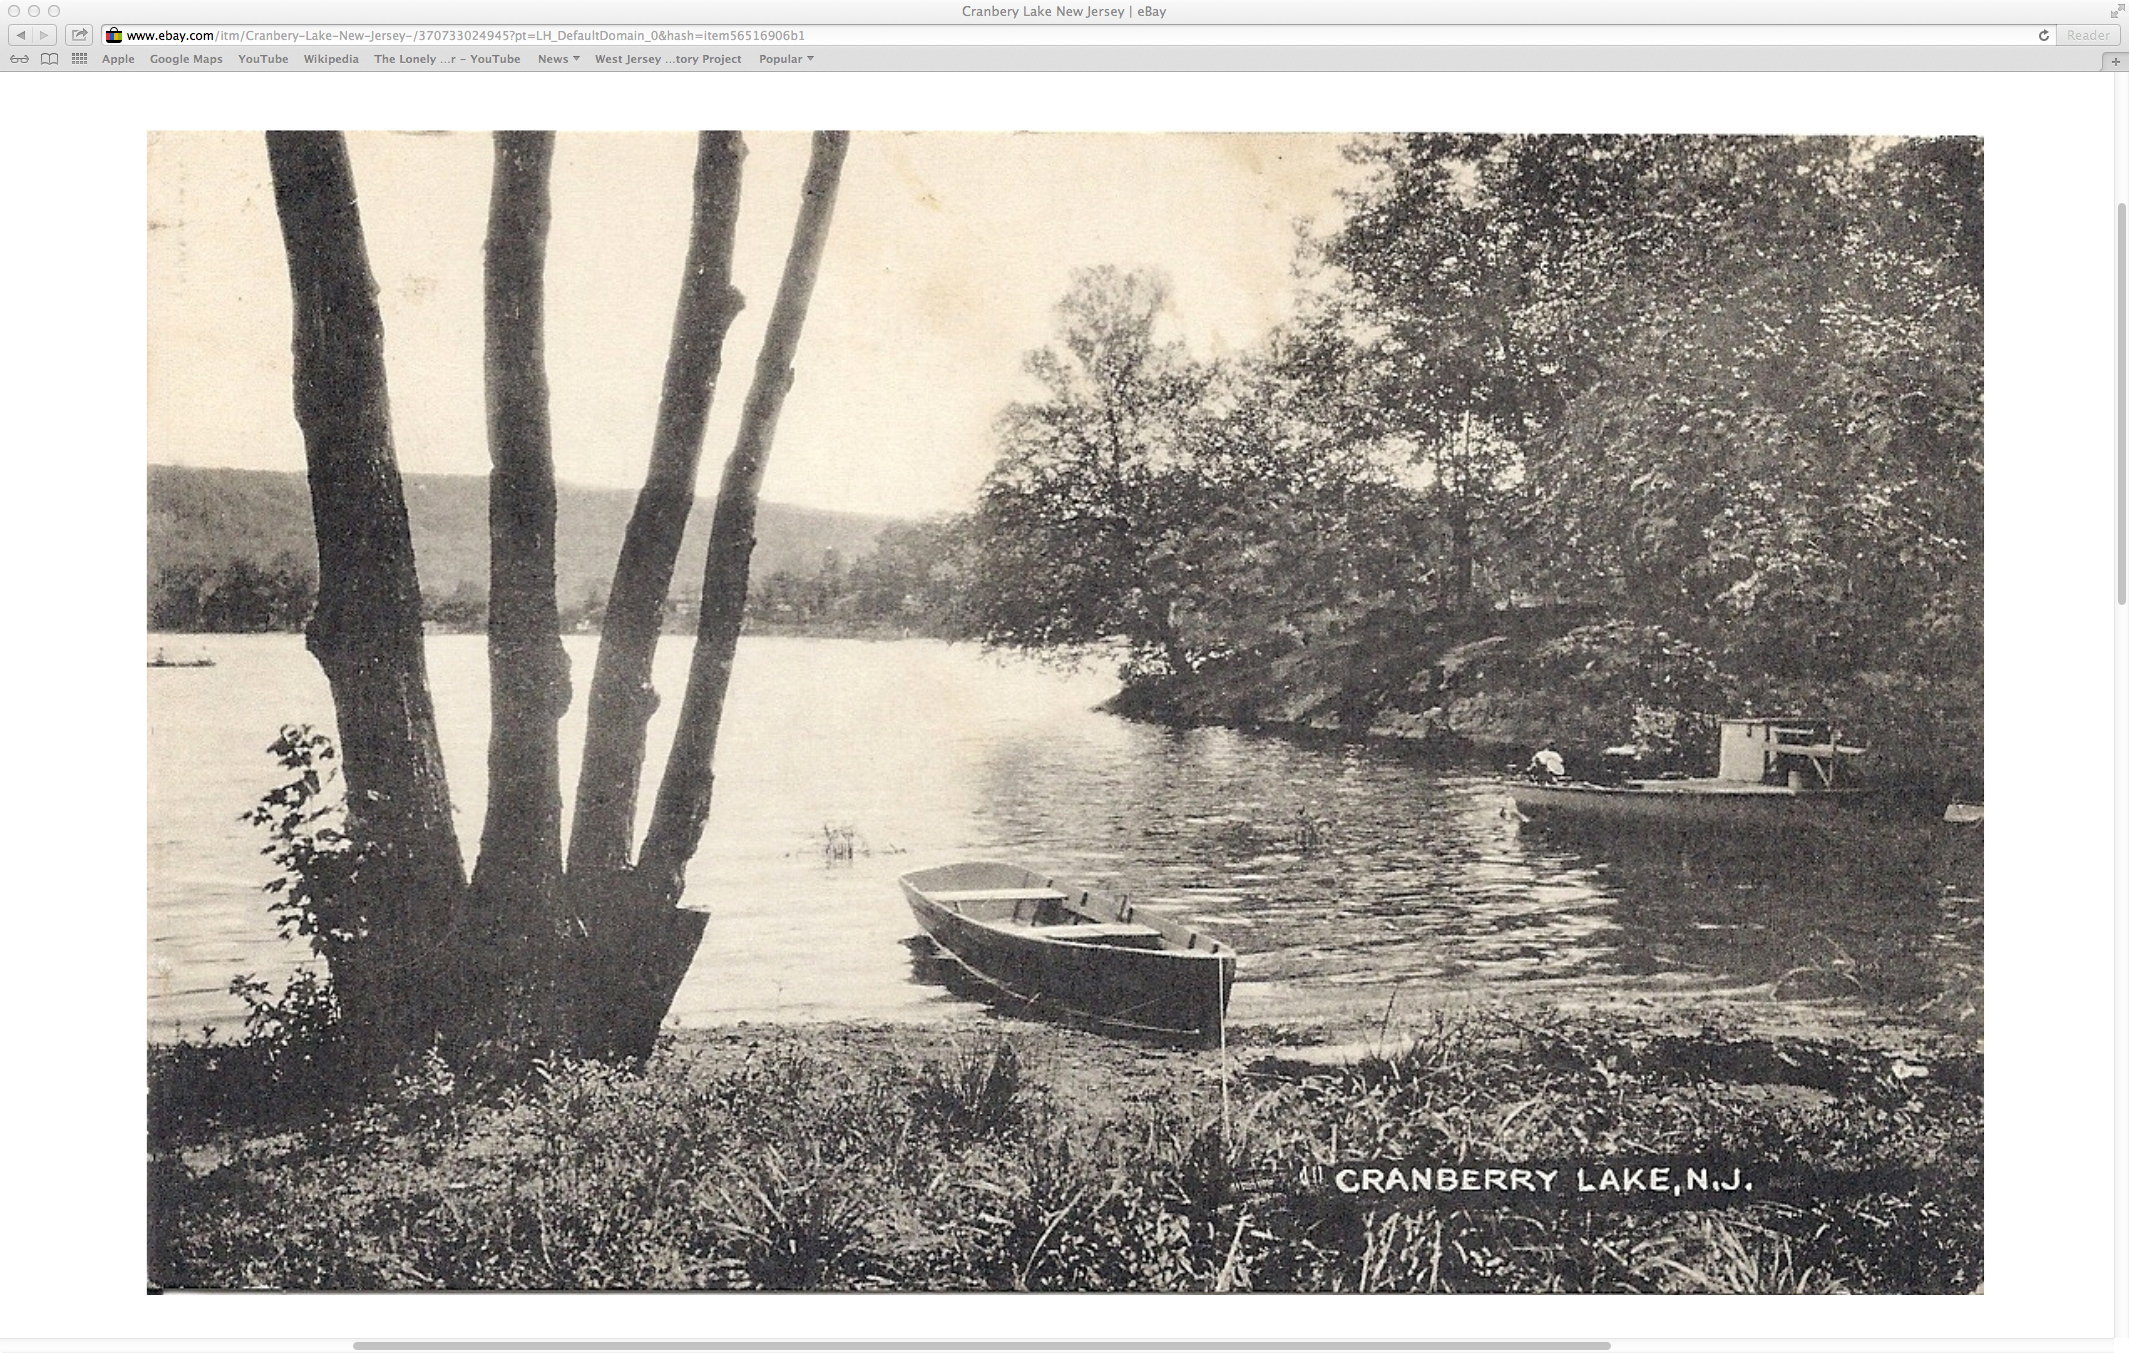 Cranberry Lake - Boats in the water - undated